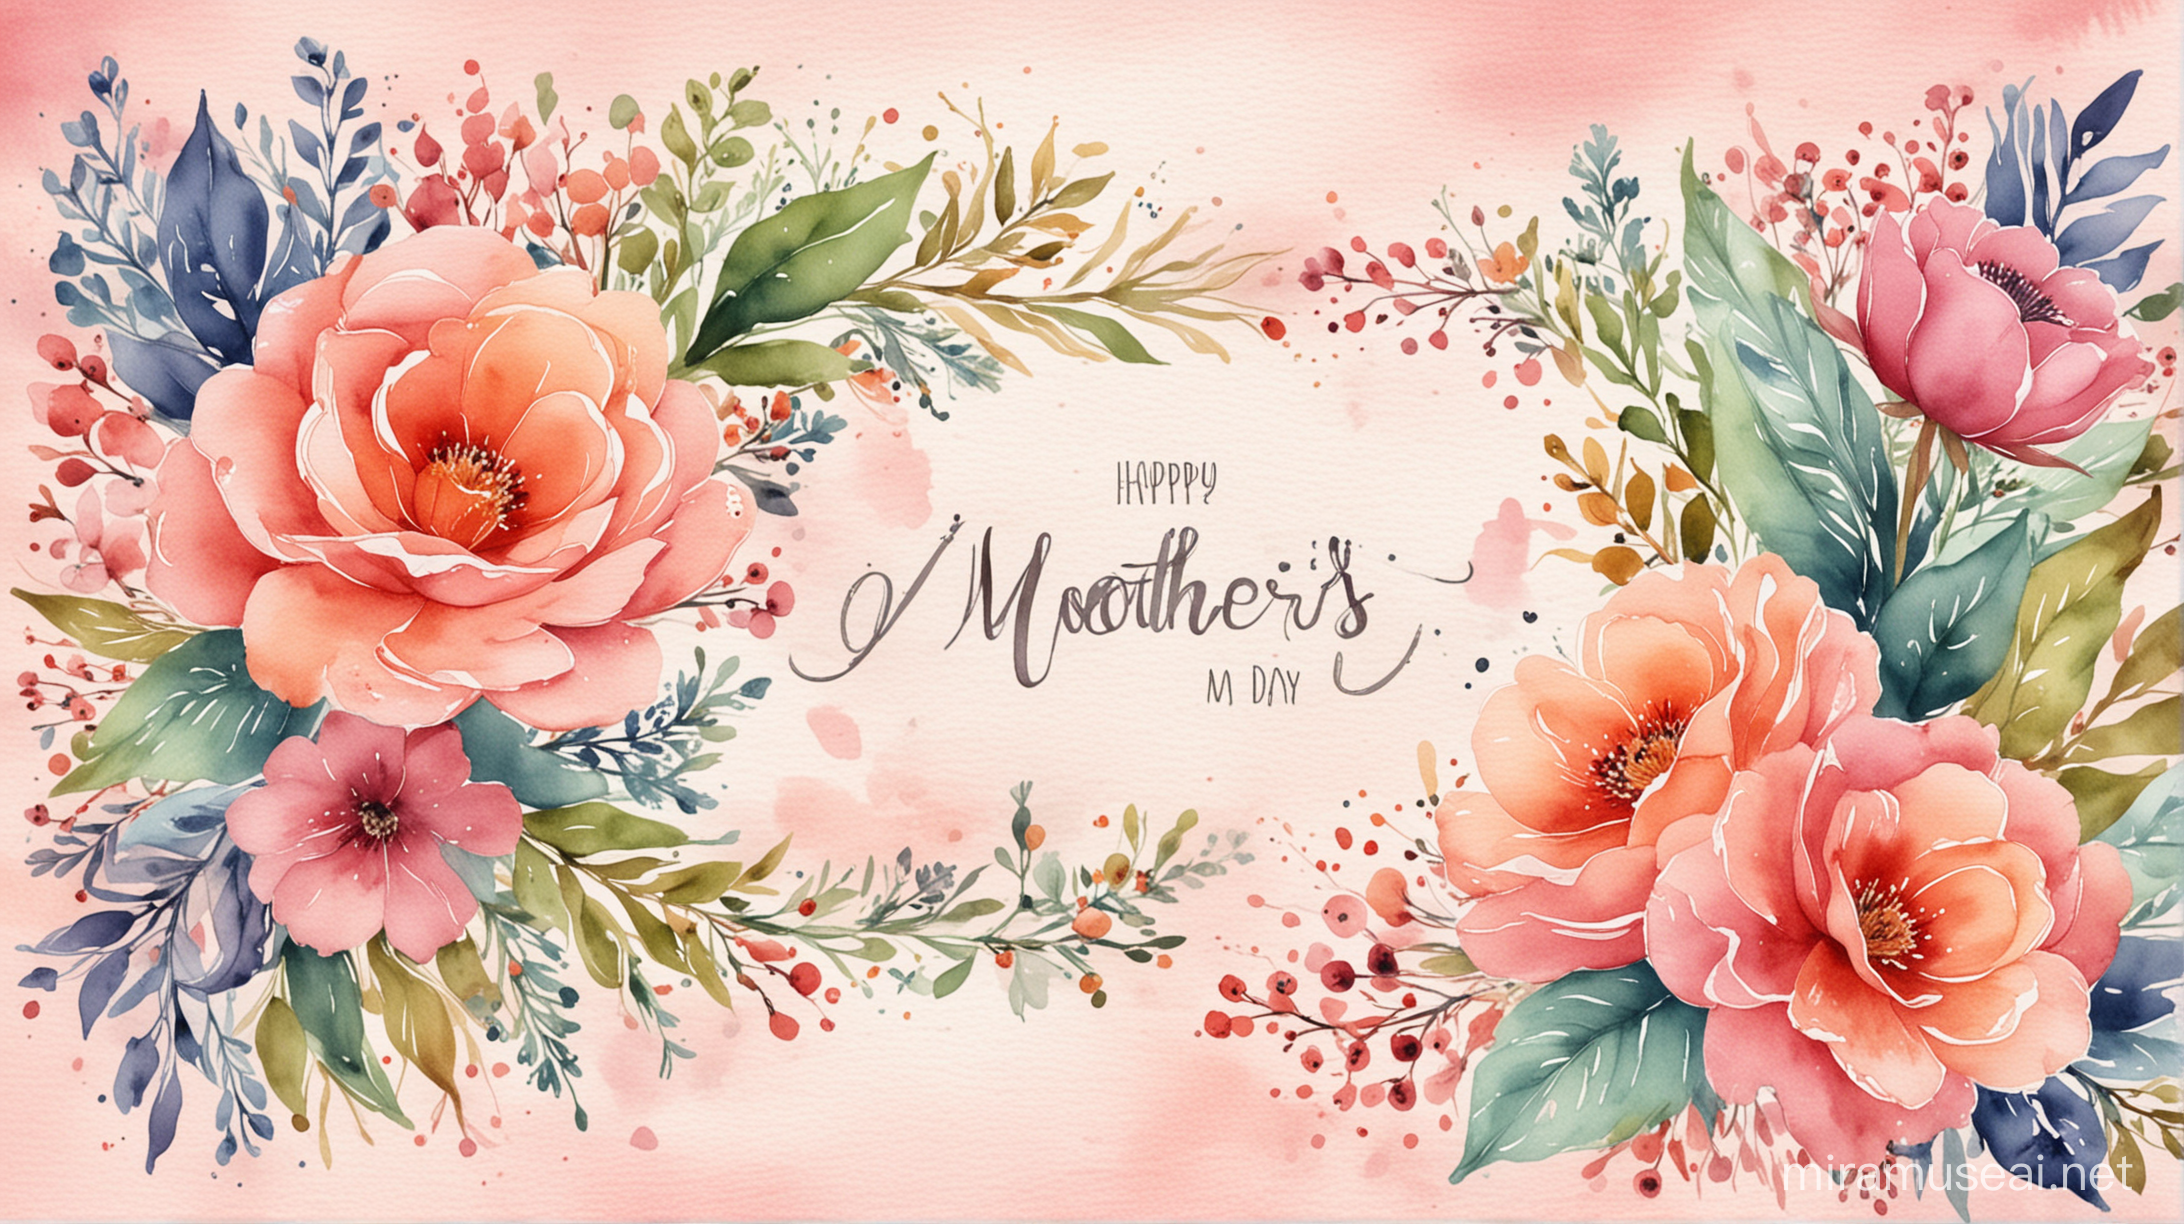 Floral Watercolor Background for Mothers Day Celebration